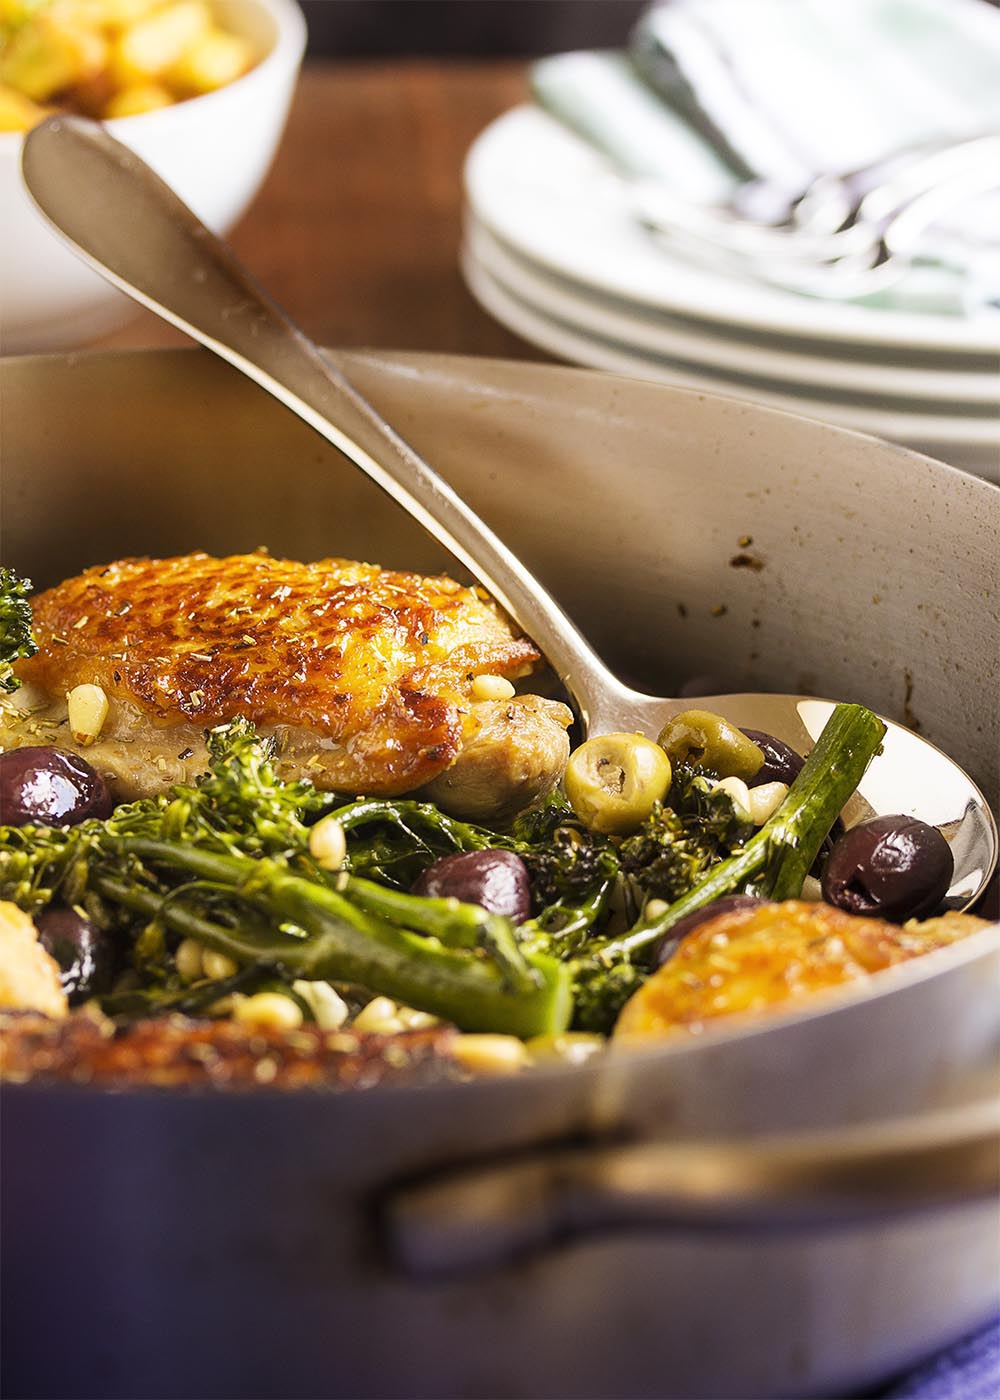 Pan Roasted Chicken Thighs with Olives and Pine Nuts - The crispy, crackling skin and juicy, flavorful meat on these chicken thighs is paired with salty olives and creamy pine nuts in this easy main dish. Add a bunch of broccolini, and you have dinner! | justalittlebitofbacon.com